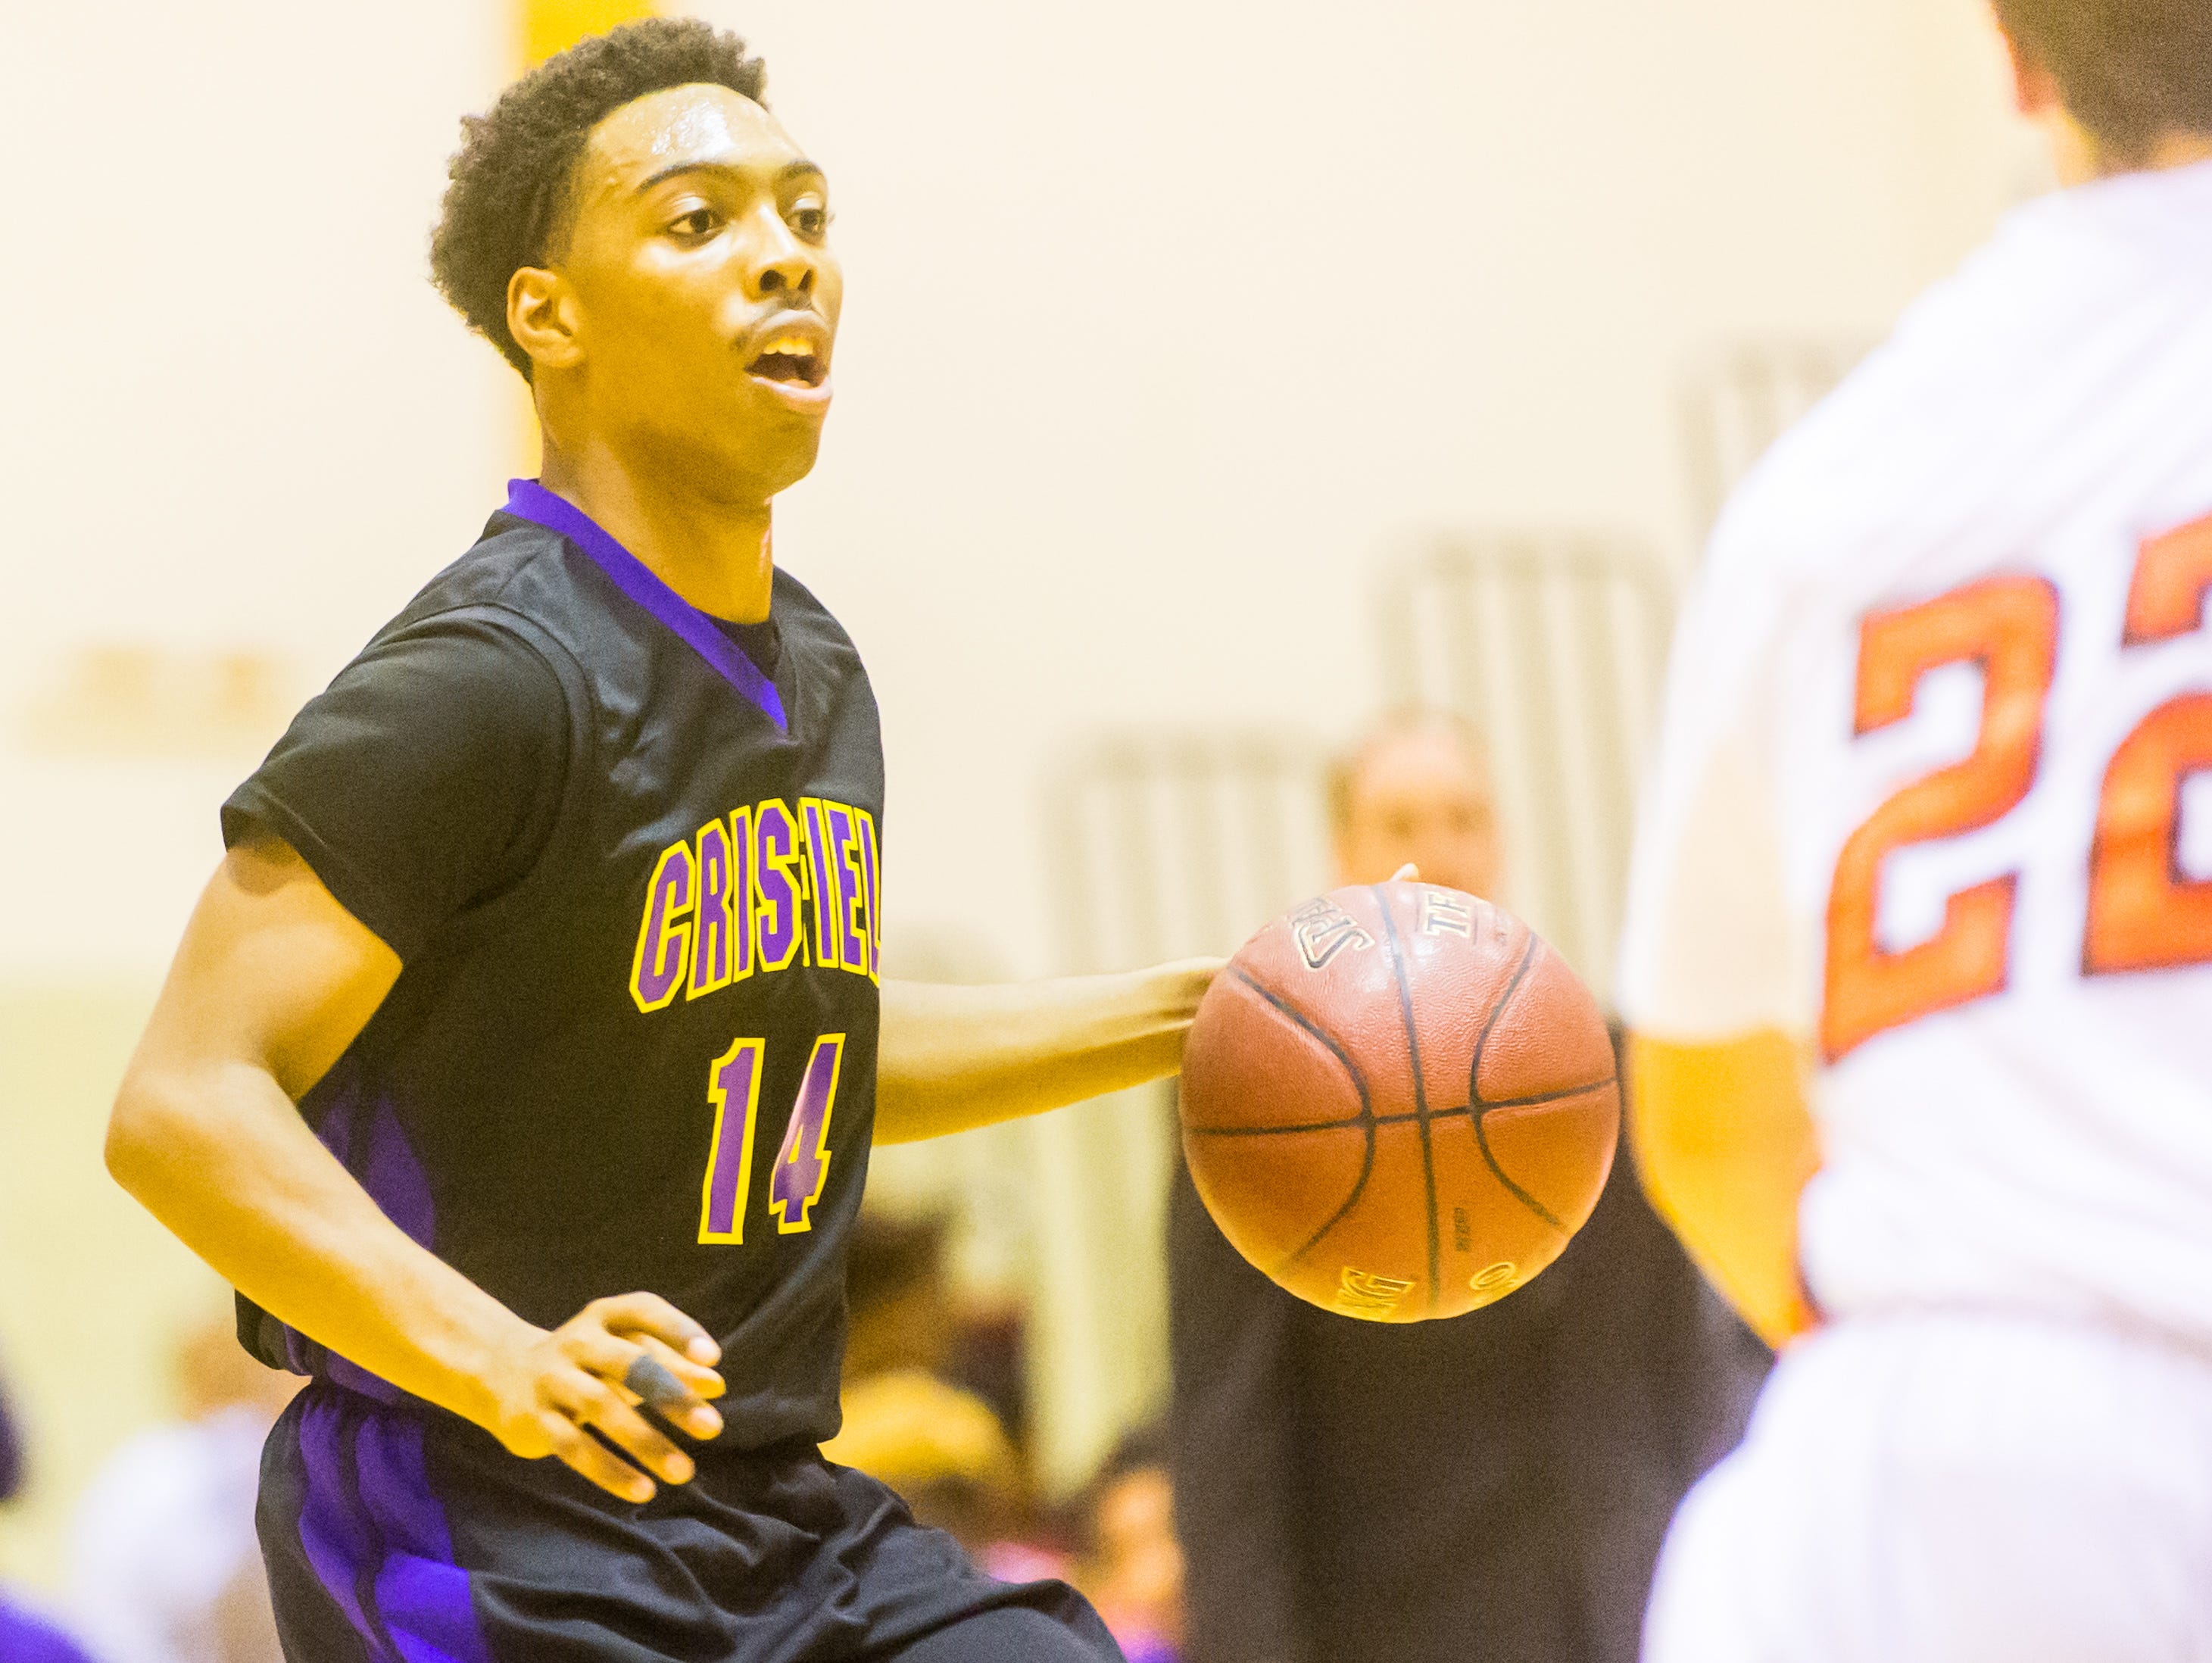 Crisfield guard DeQuantae White (14) looks to pass against Easton on Friday, December 4th at Easton High.